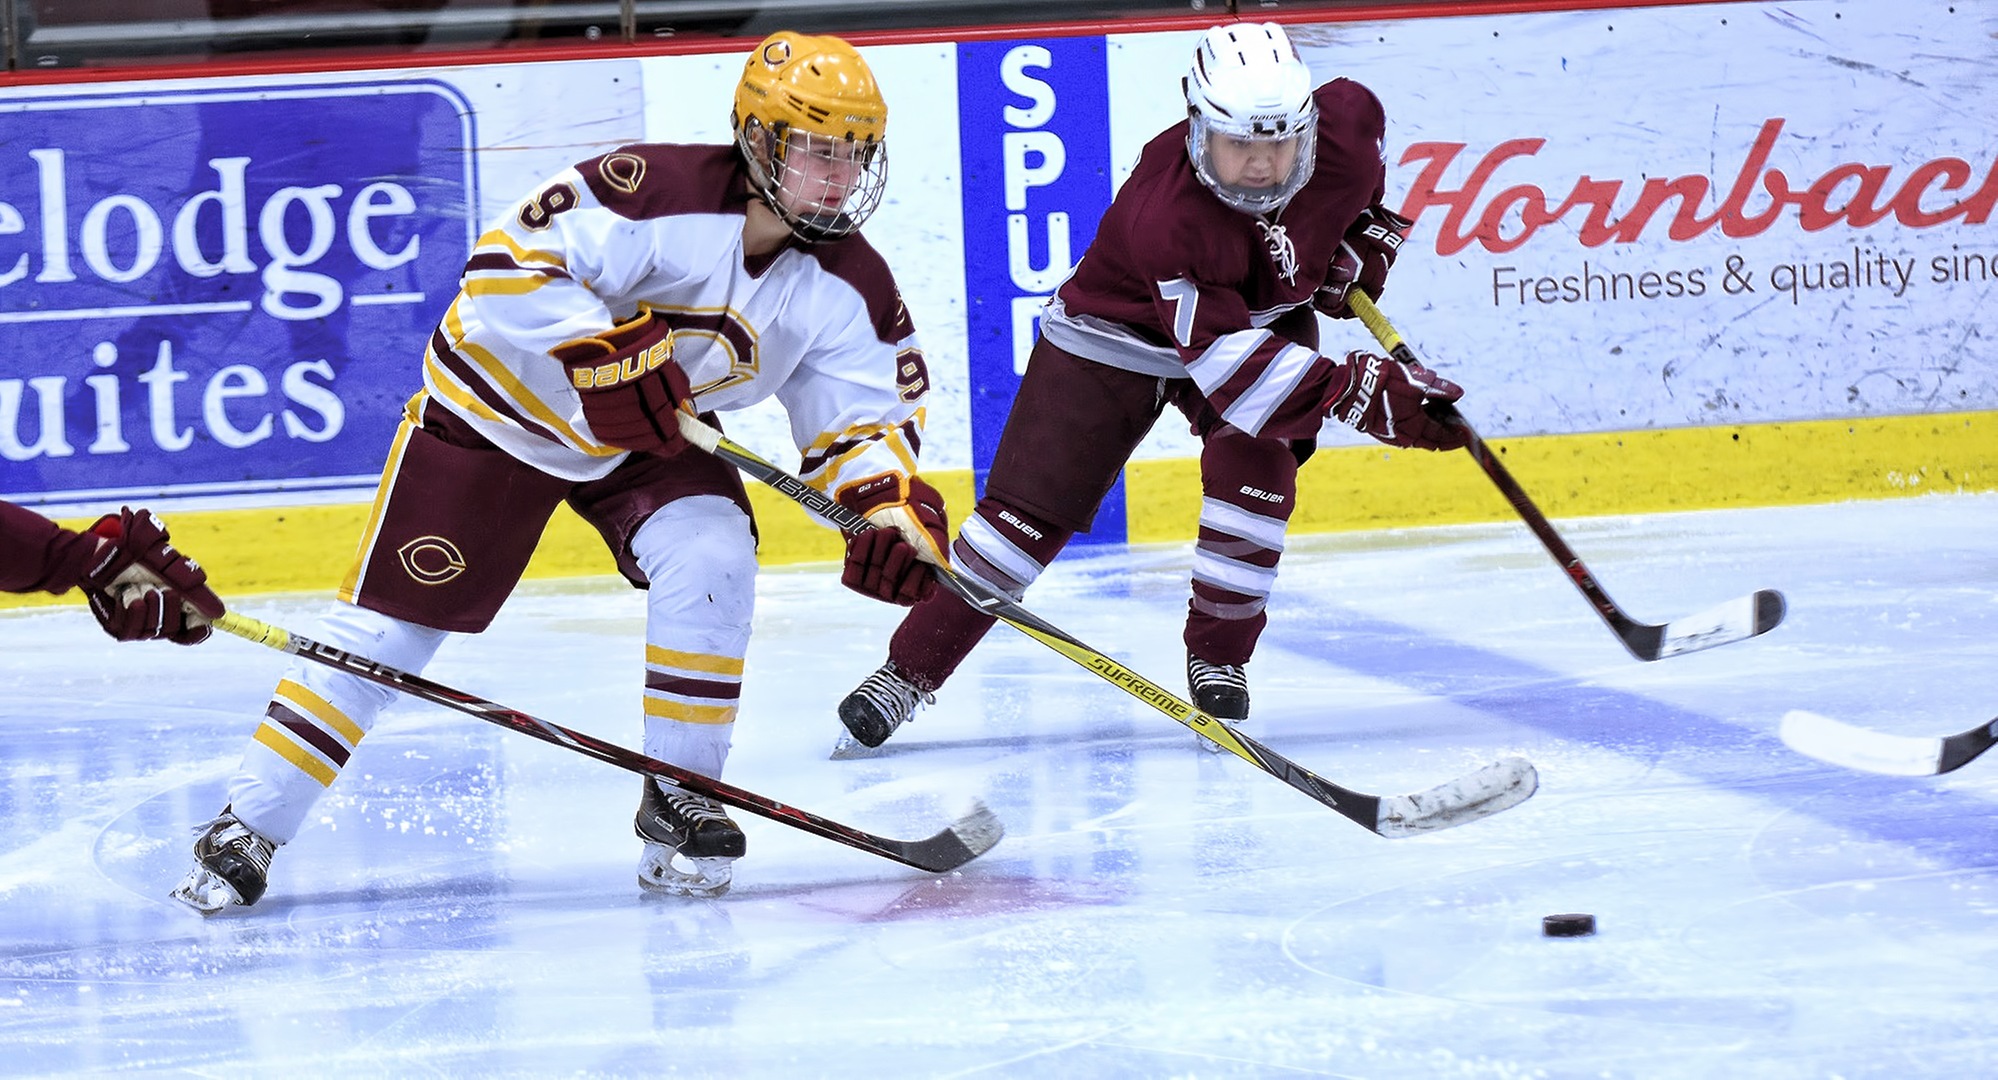 Sophomore Allison O'Kane scored her first collegiate goal in the Cobbers' thrilling game at #5 Wis.-Eau Claire.